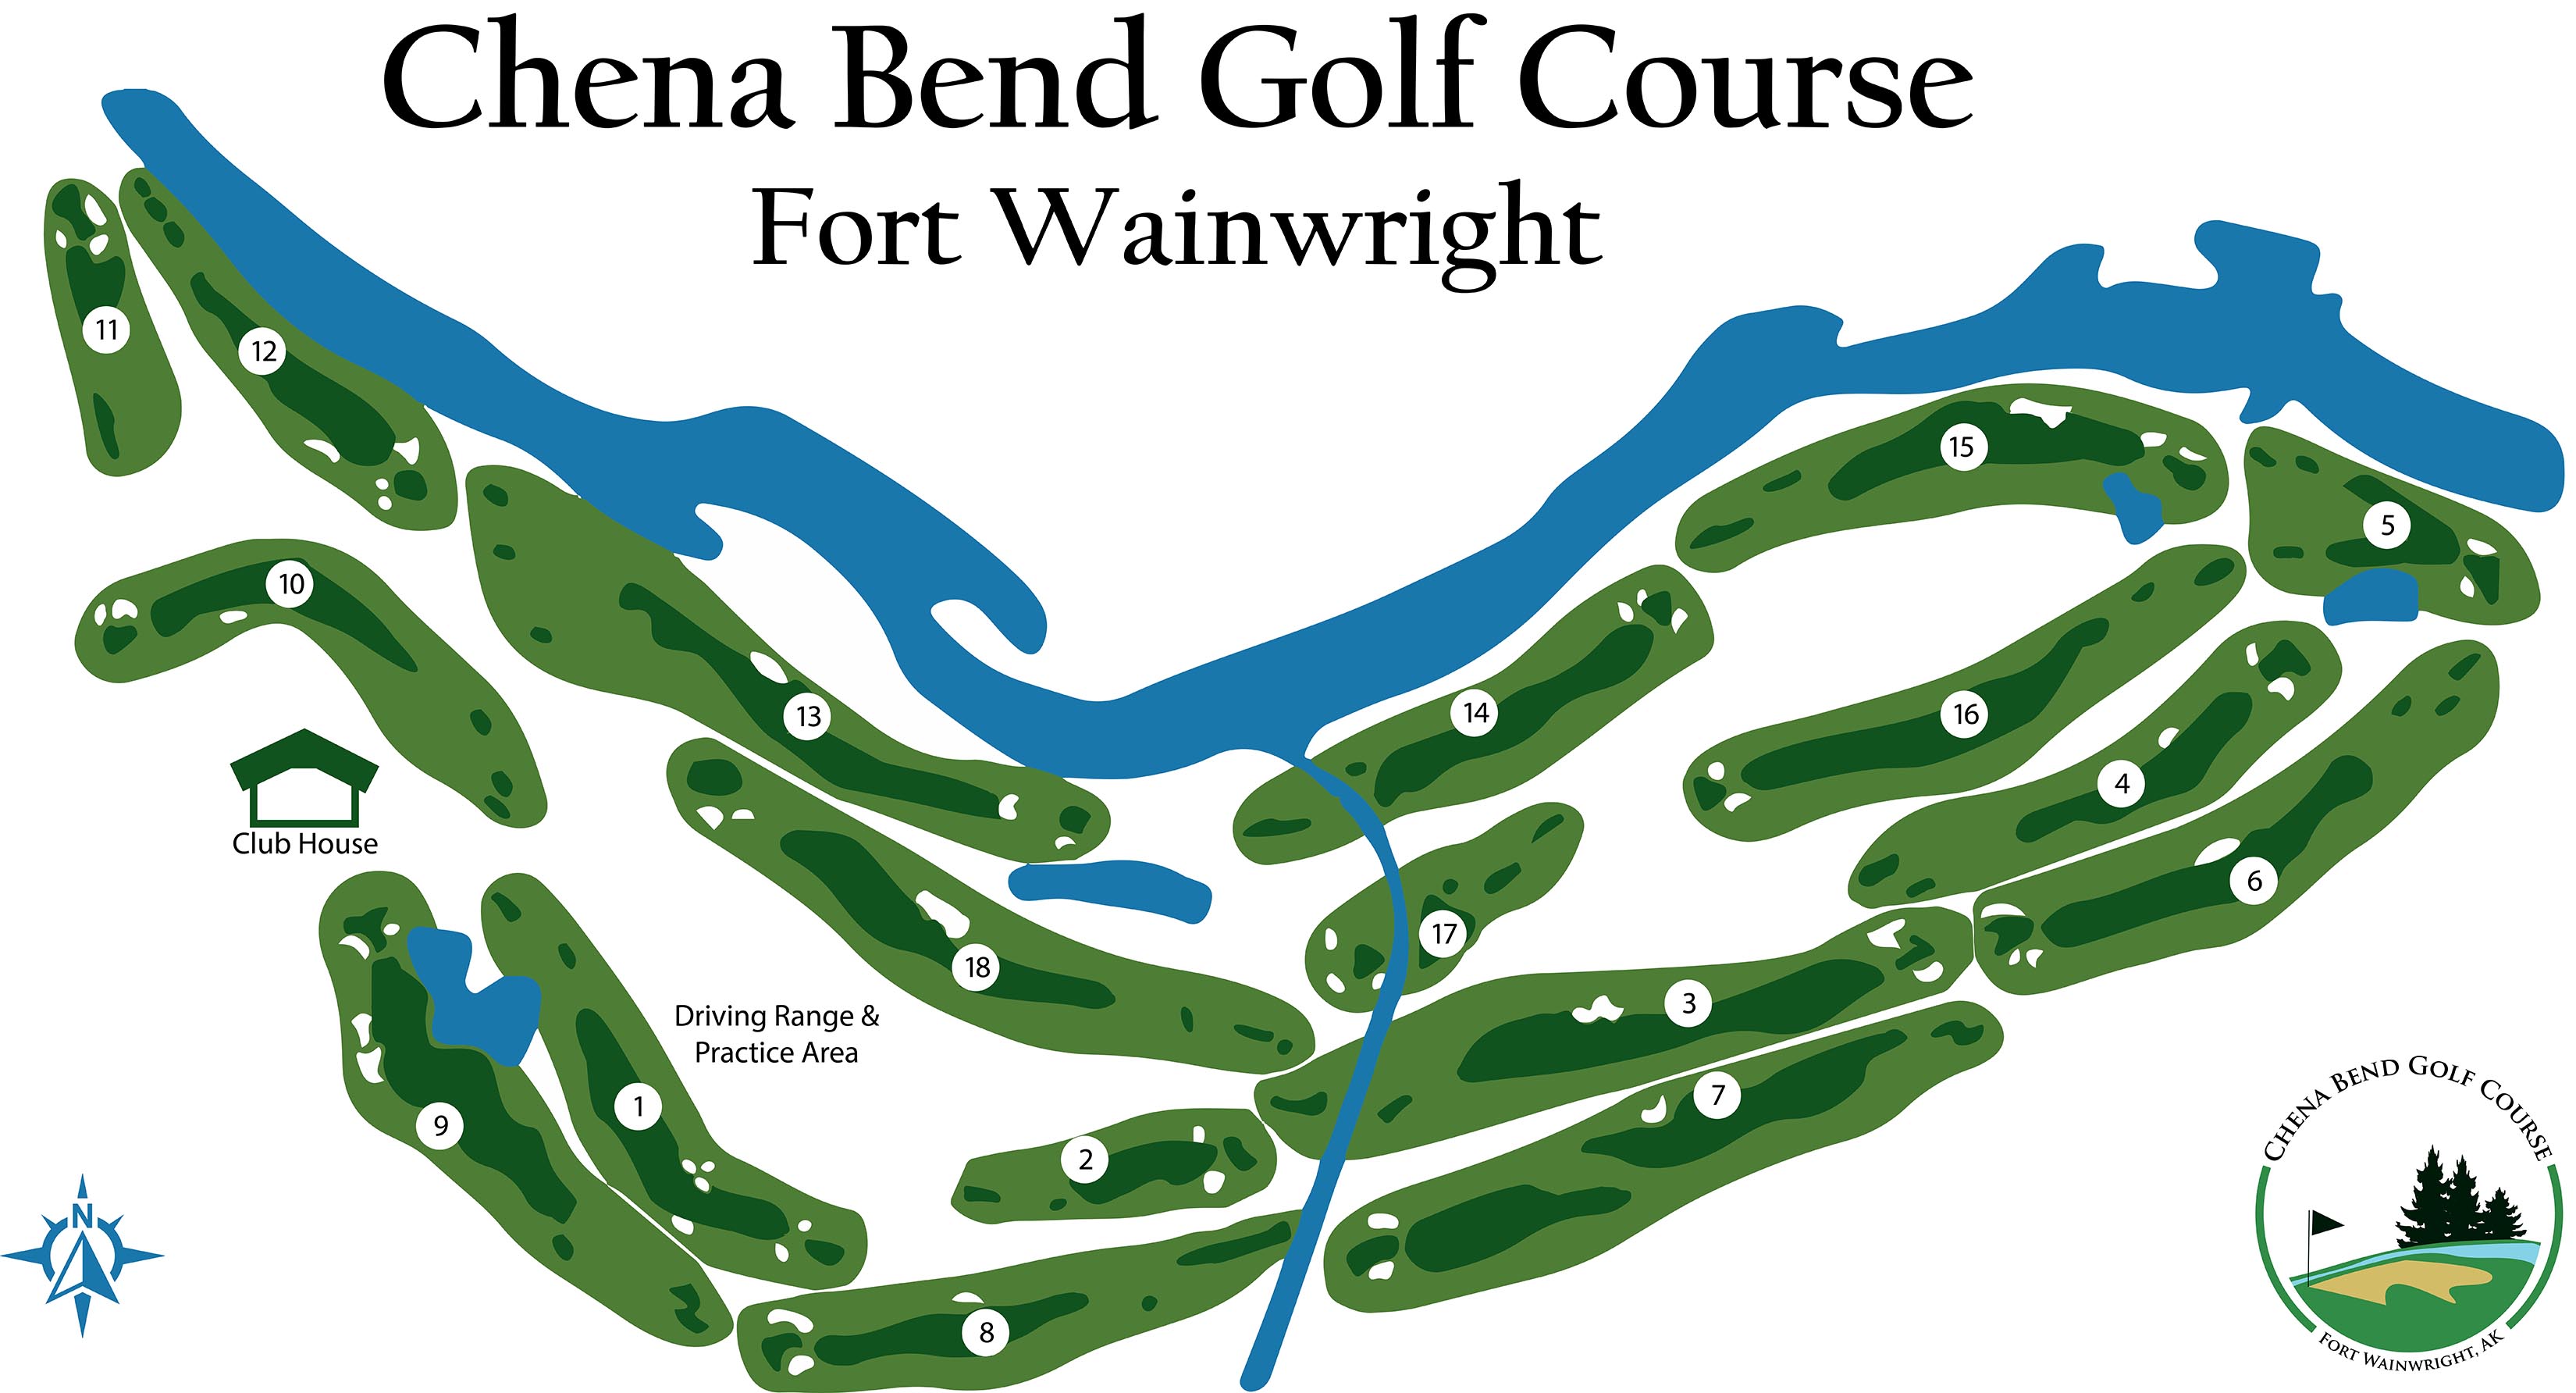 Wainwright_Chena_Bend_Golf_Course_Map_Summer_reduced.jpg